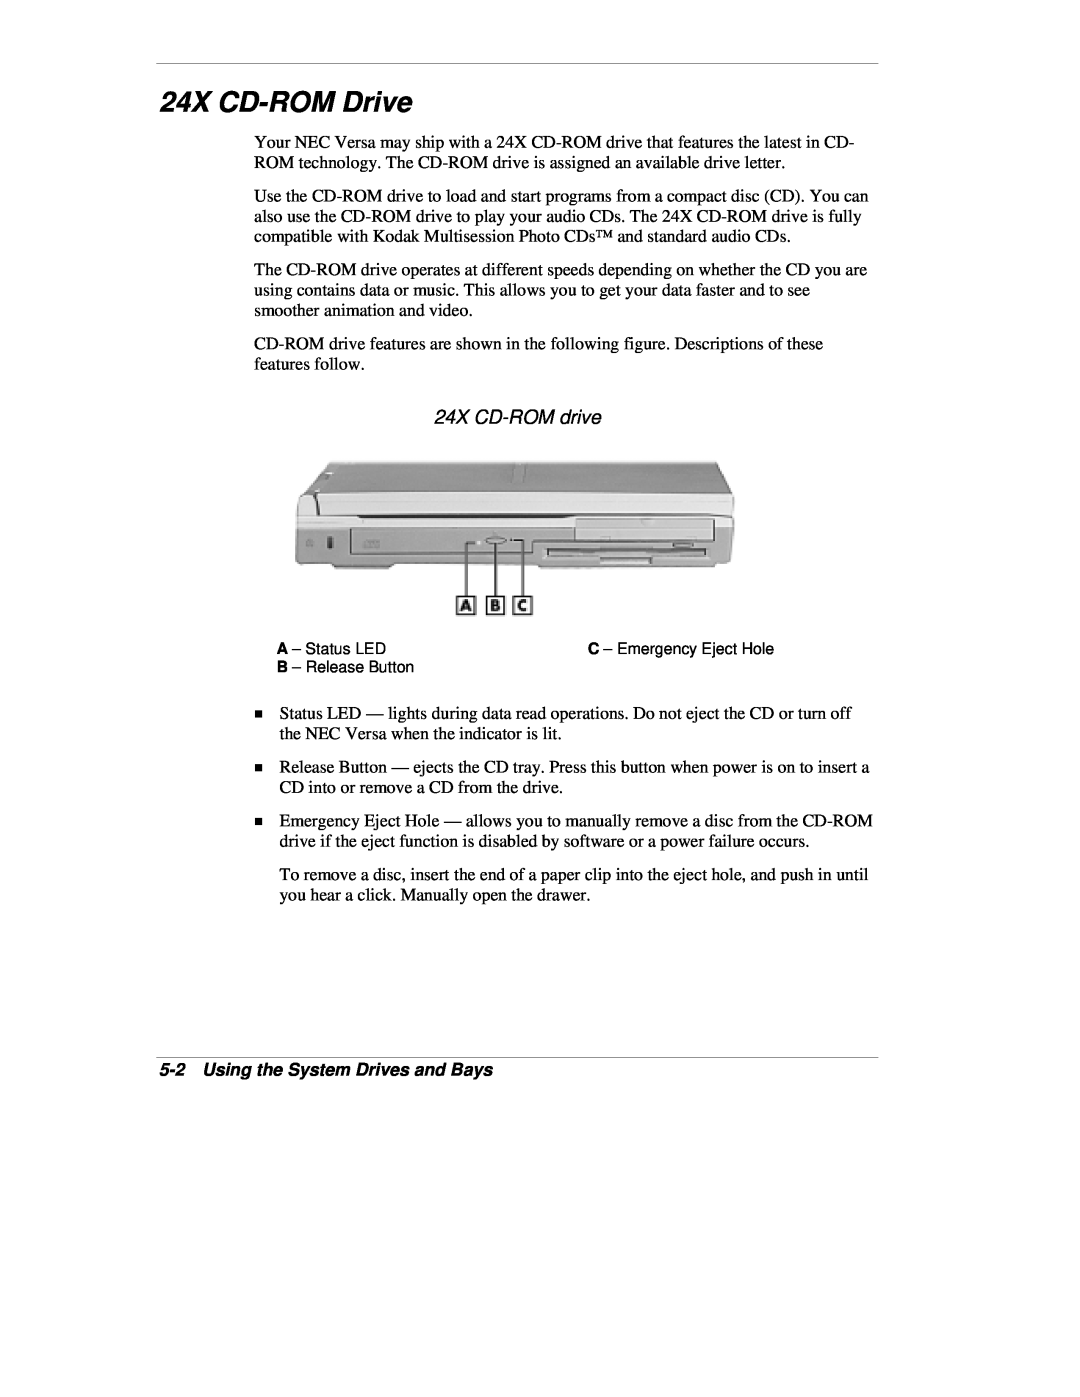 NEC VX manual 24X CD-ROM Drive, 24X CD-ROM drive, Using the System Drives and Bays 